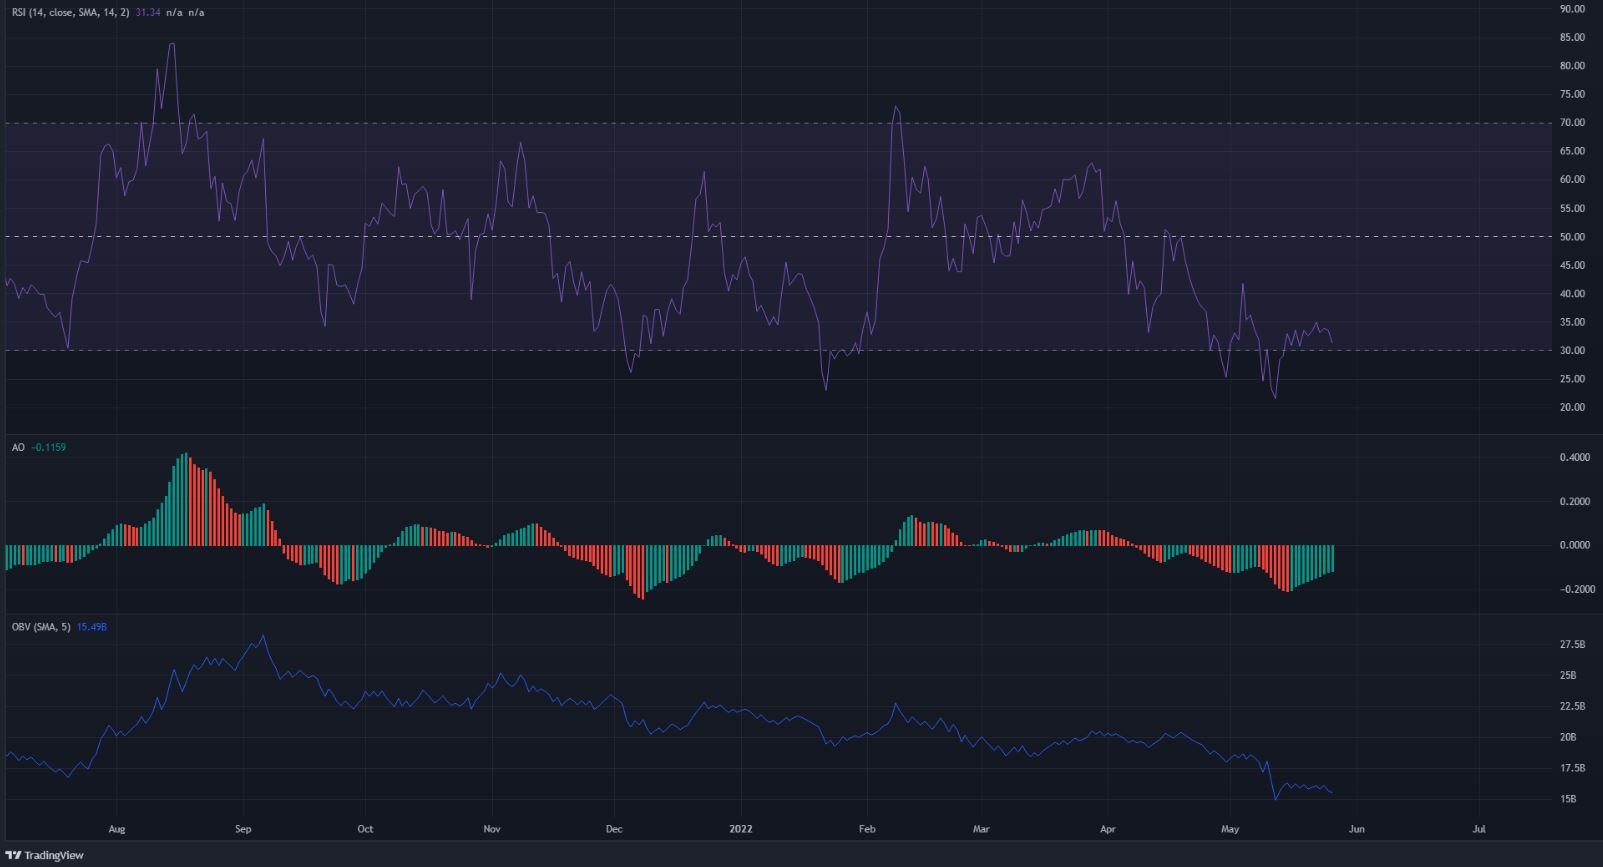 XRP set to drop beneath yet another support level as $0.25 beckons